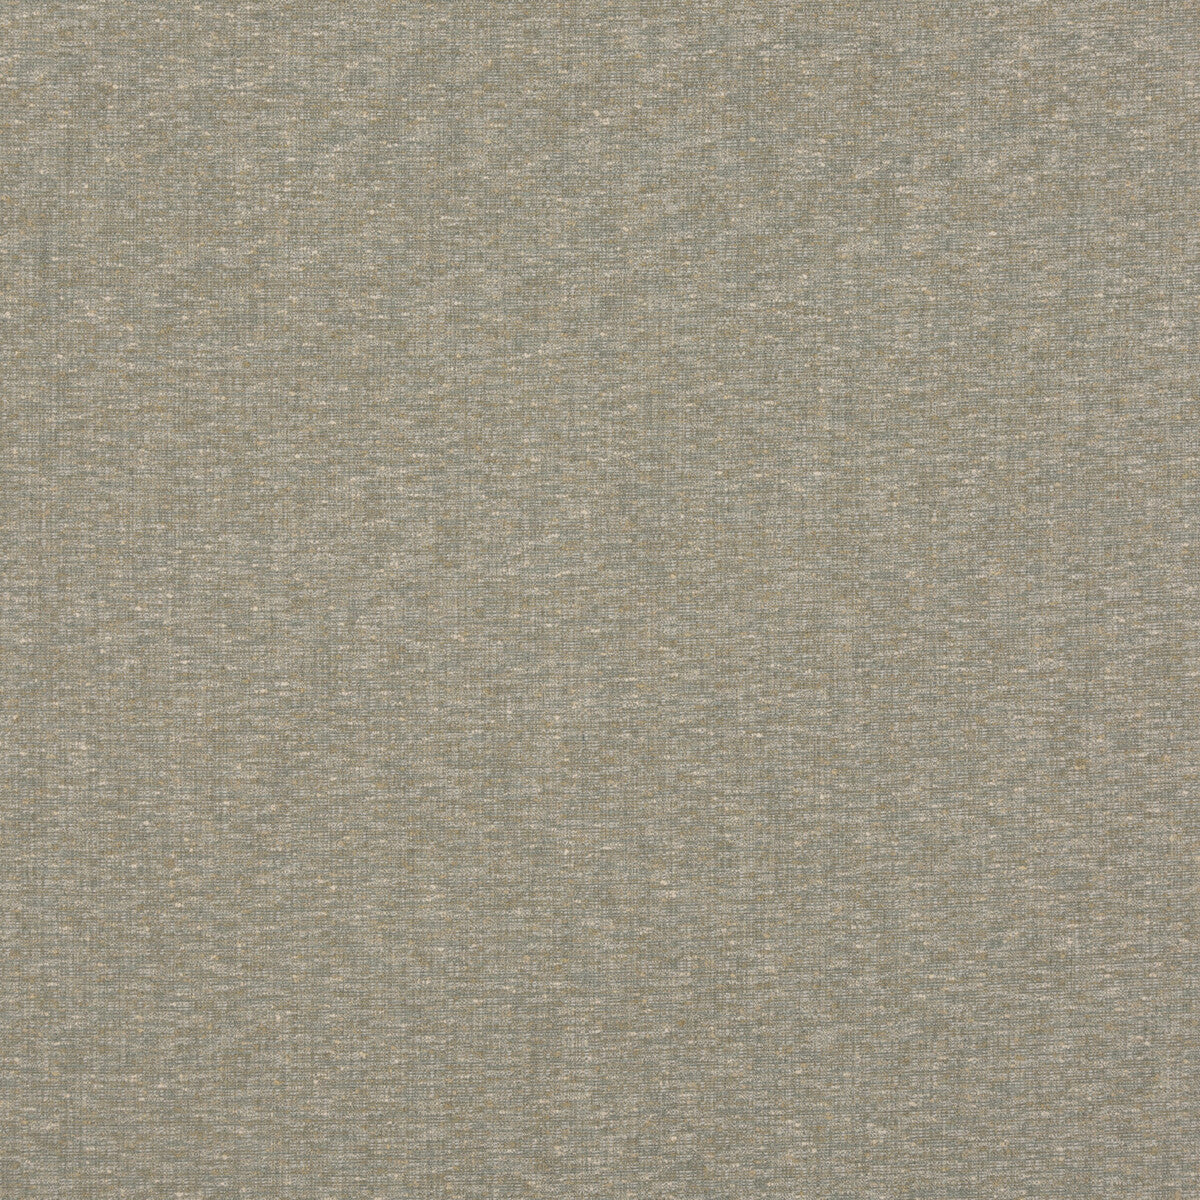 Drift fabric in shingle color - pattern BF10678.915.0 - by G P &amp; J Baker in the Essential Colours collection